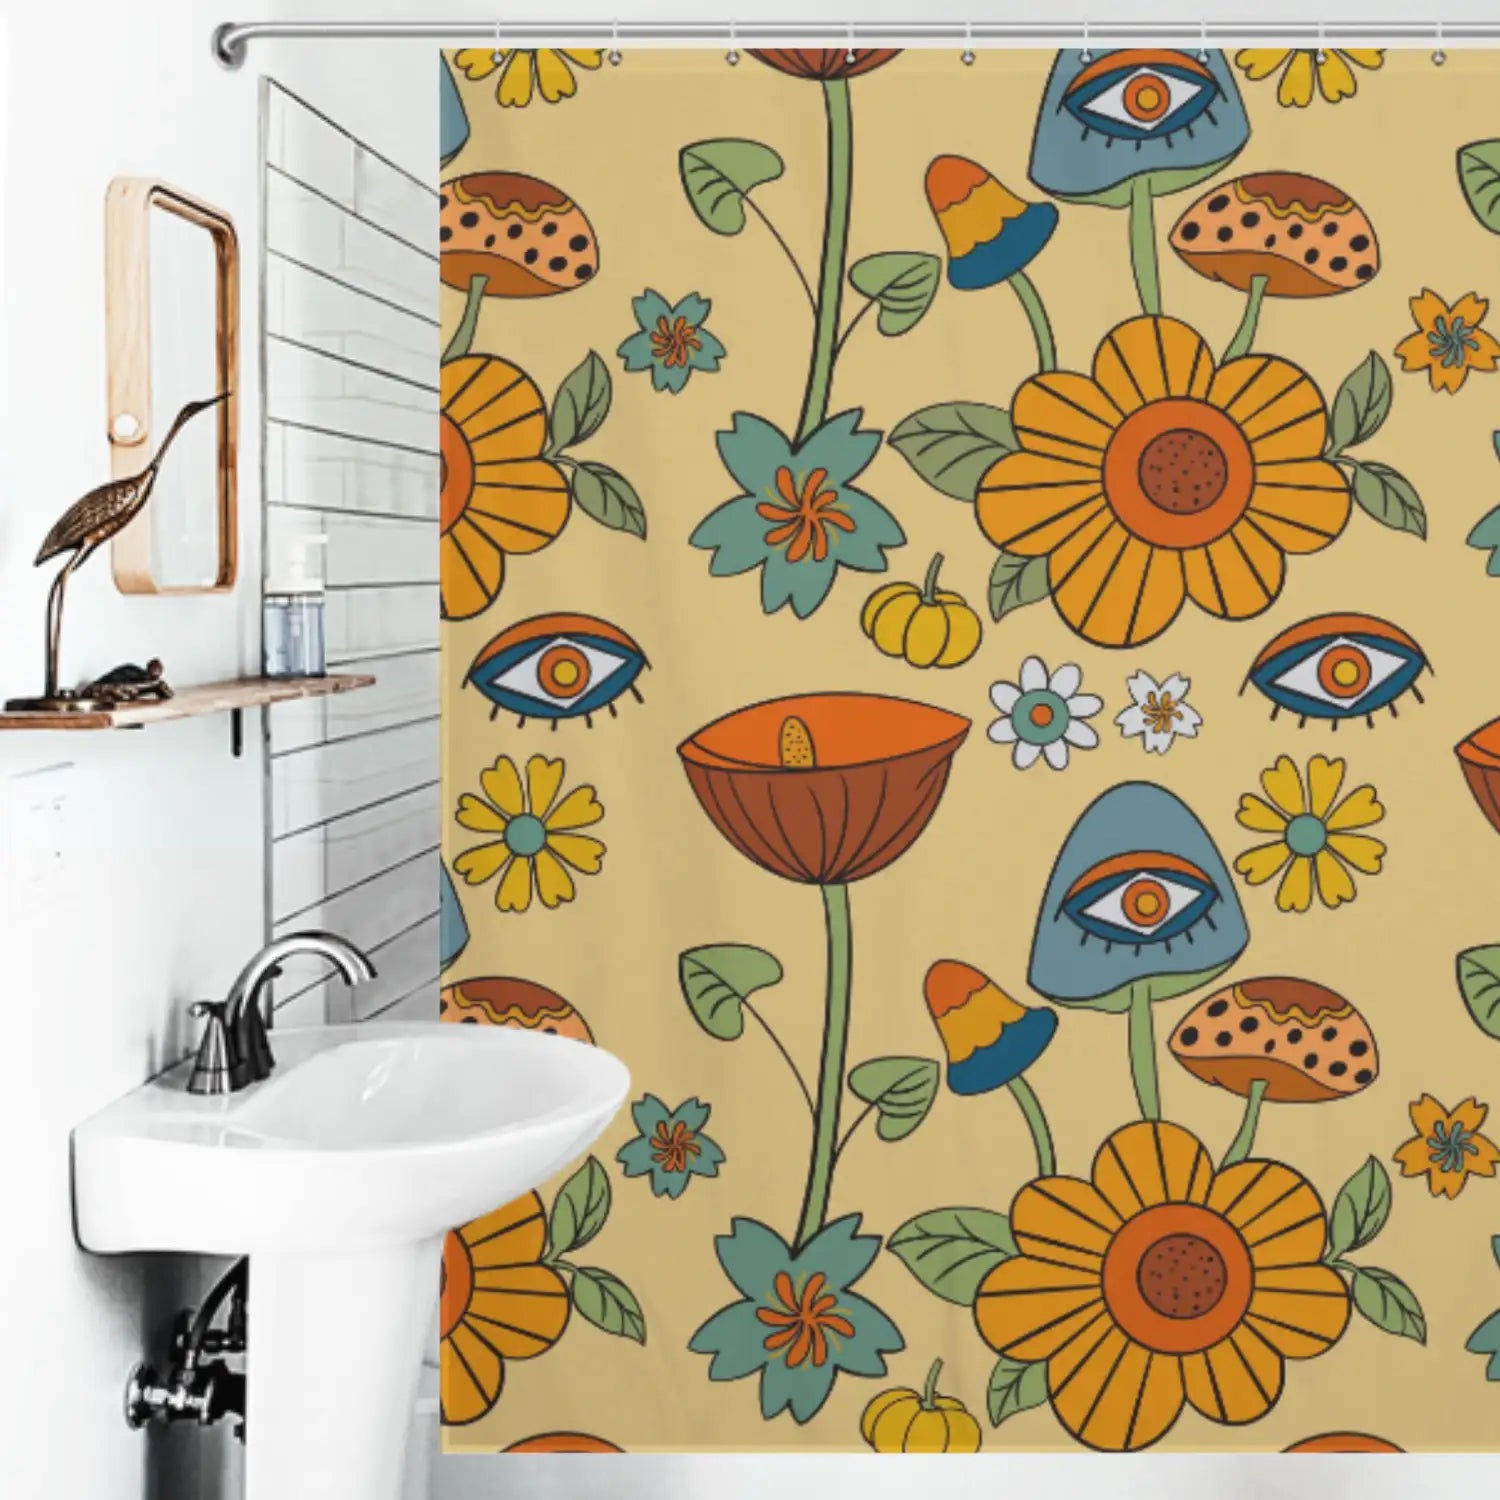 Transform your bathroom decor with the Mushroom Eye Flowers Shower Curtain by Cotton Cat. Instantly elevate your space into a tranquil oasis reminiscent of a beautiful garden. Indulge in the ultimate relaxation with Cotton Cat.